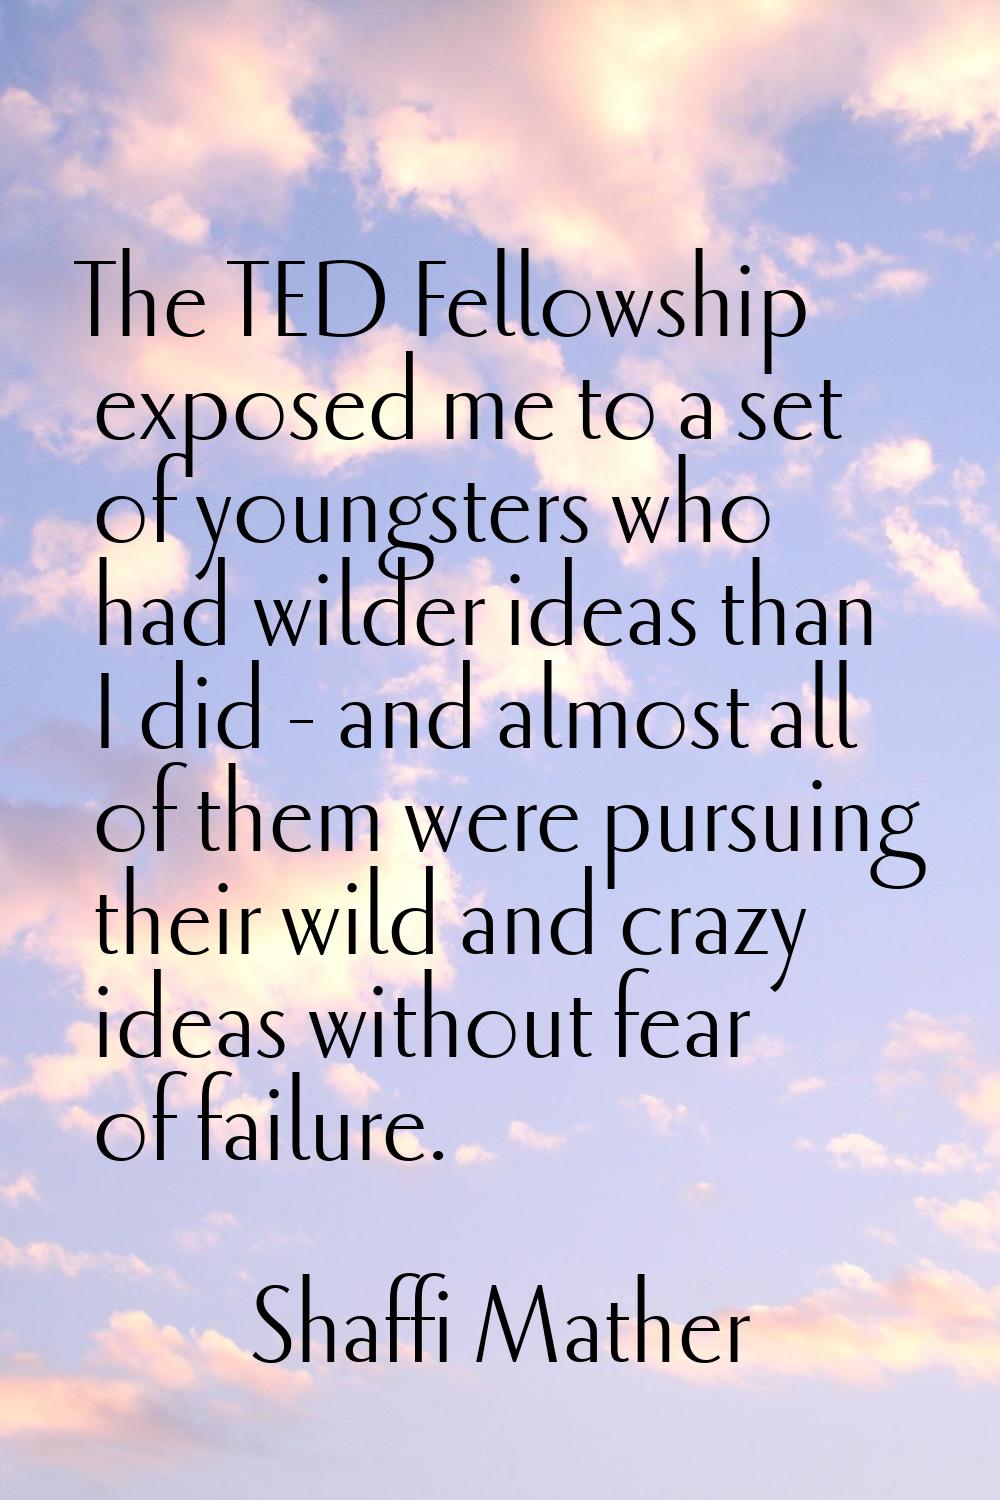 The TED Fellowship exposed me to a set of youngsters who had wilder ideas than I did - and almost a